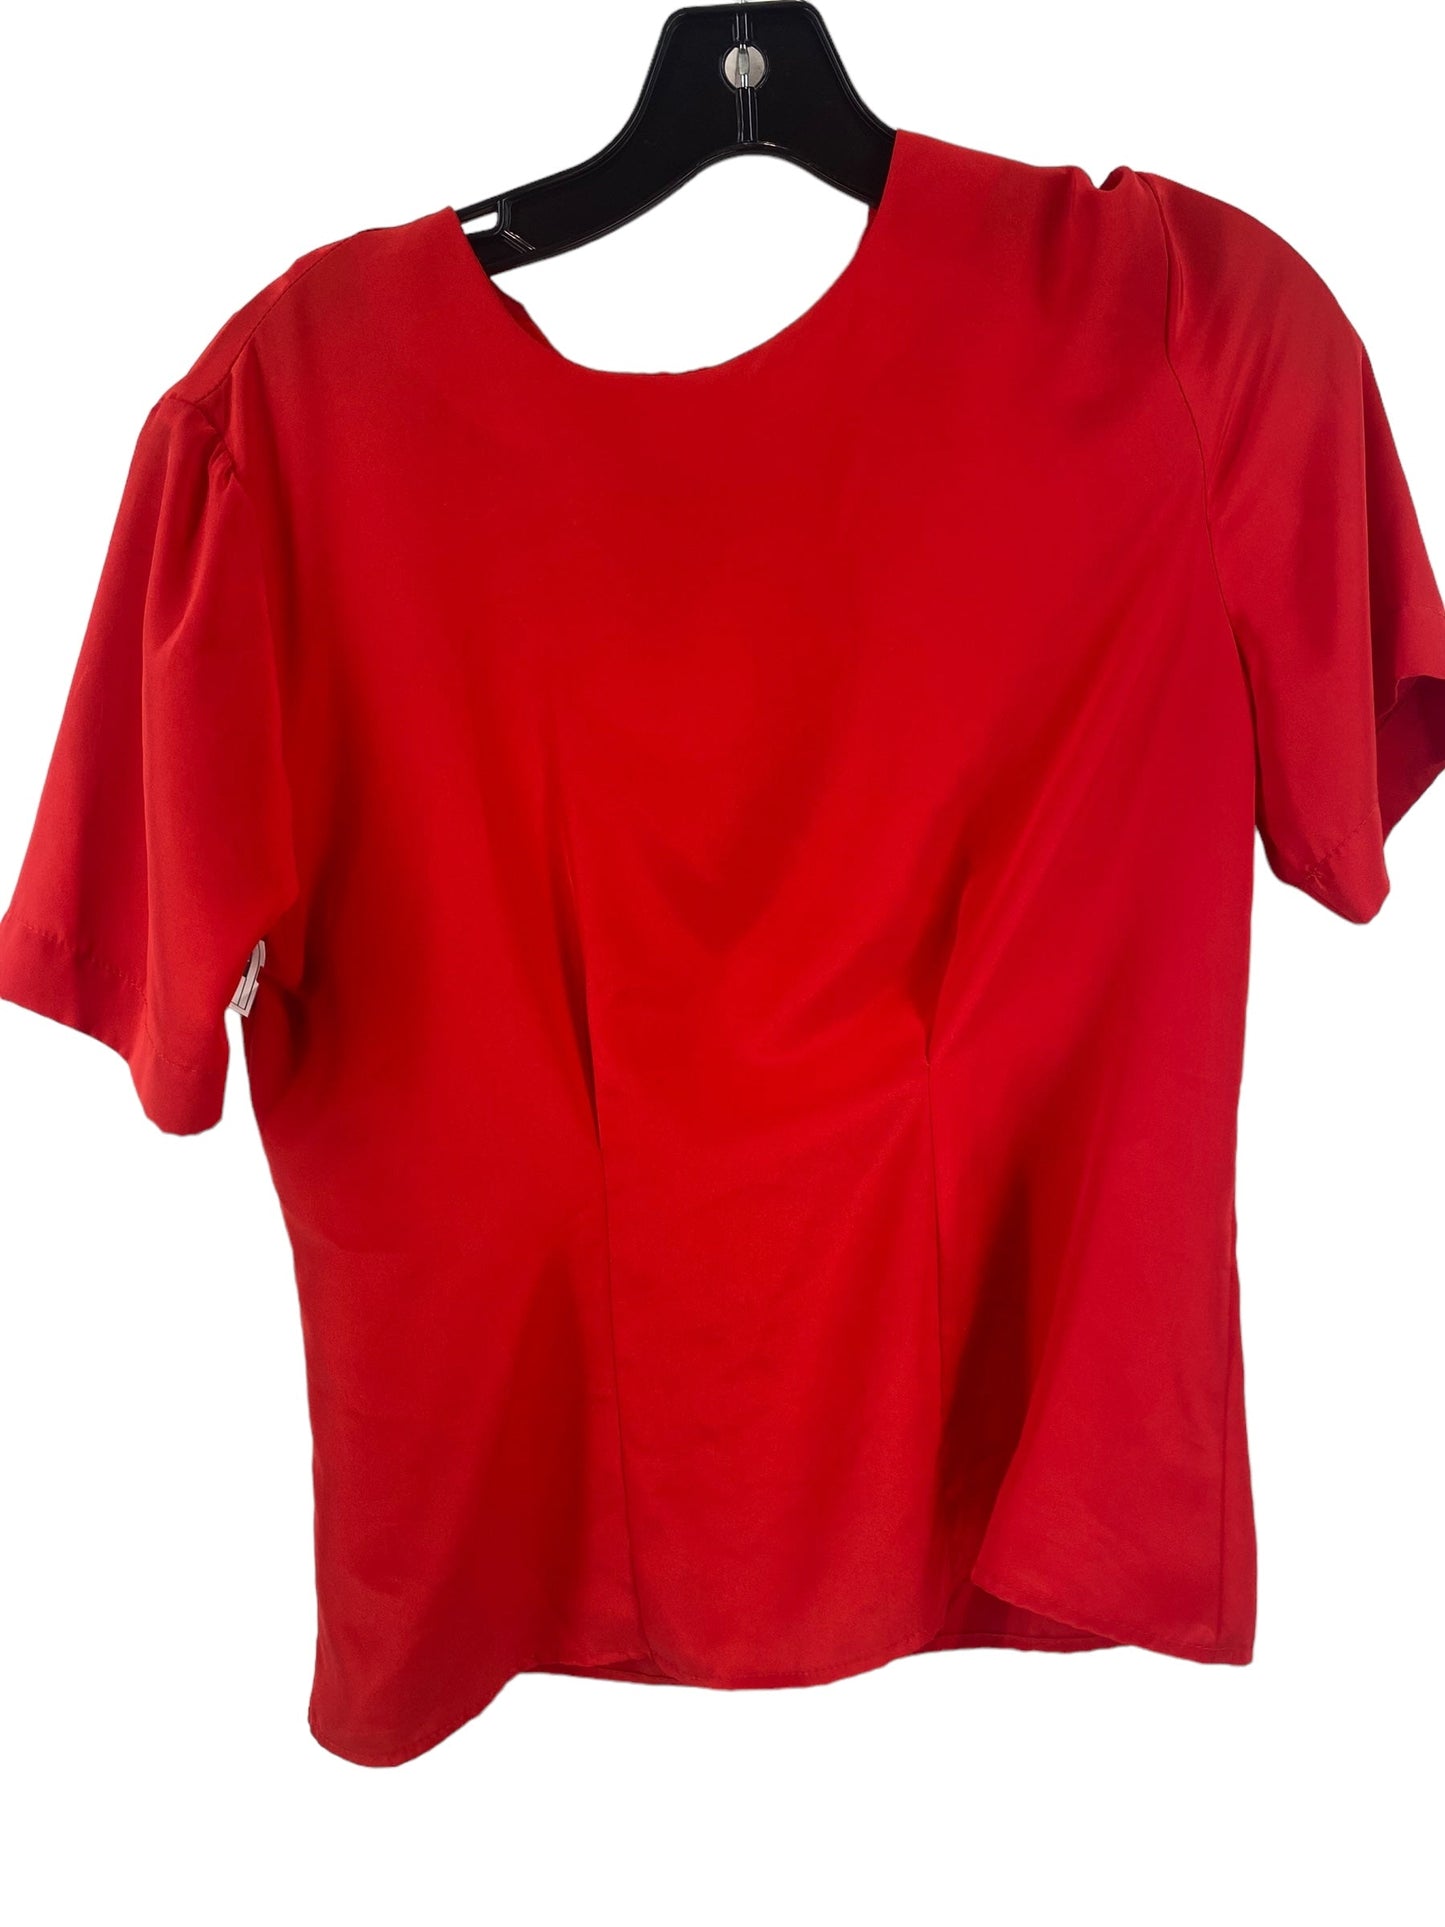 Red Top Short Sleeve Anna Kriste, Size Petite